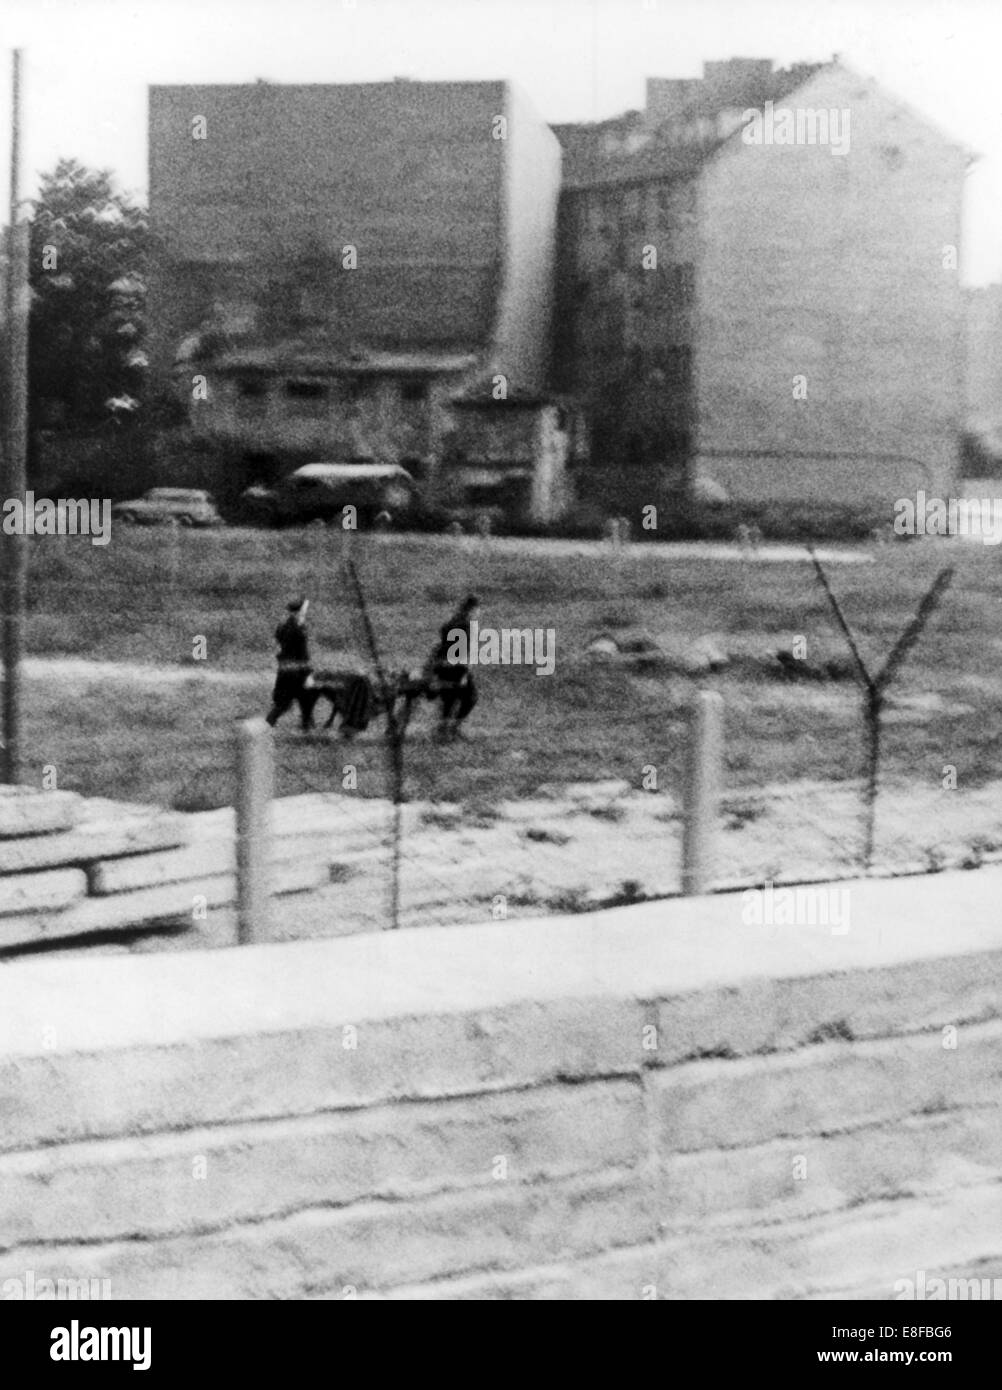 Evacuation of the body by East Berlin border guards. A 40 to 50 year old man got shot by East Berlin border guards during his escape attempt on the cemetery at the border corner Bernauer Street/ Berg Street on 4th September 1962. The Federal Republic of Germany and the German Democratic Republic were split into west and east by an iron curtain from 13th August 1961, the day of the building of Berlin Wall, to the fall of the wall on 9th November 1989. Stock Photo